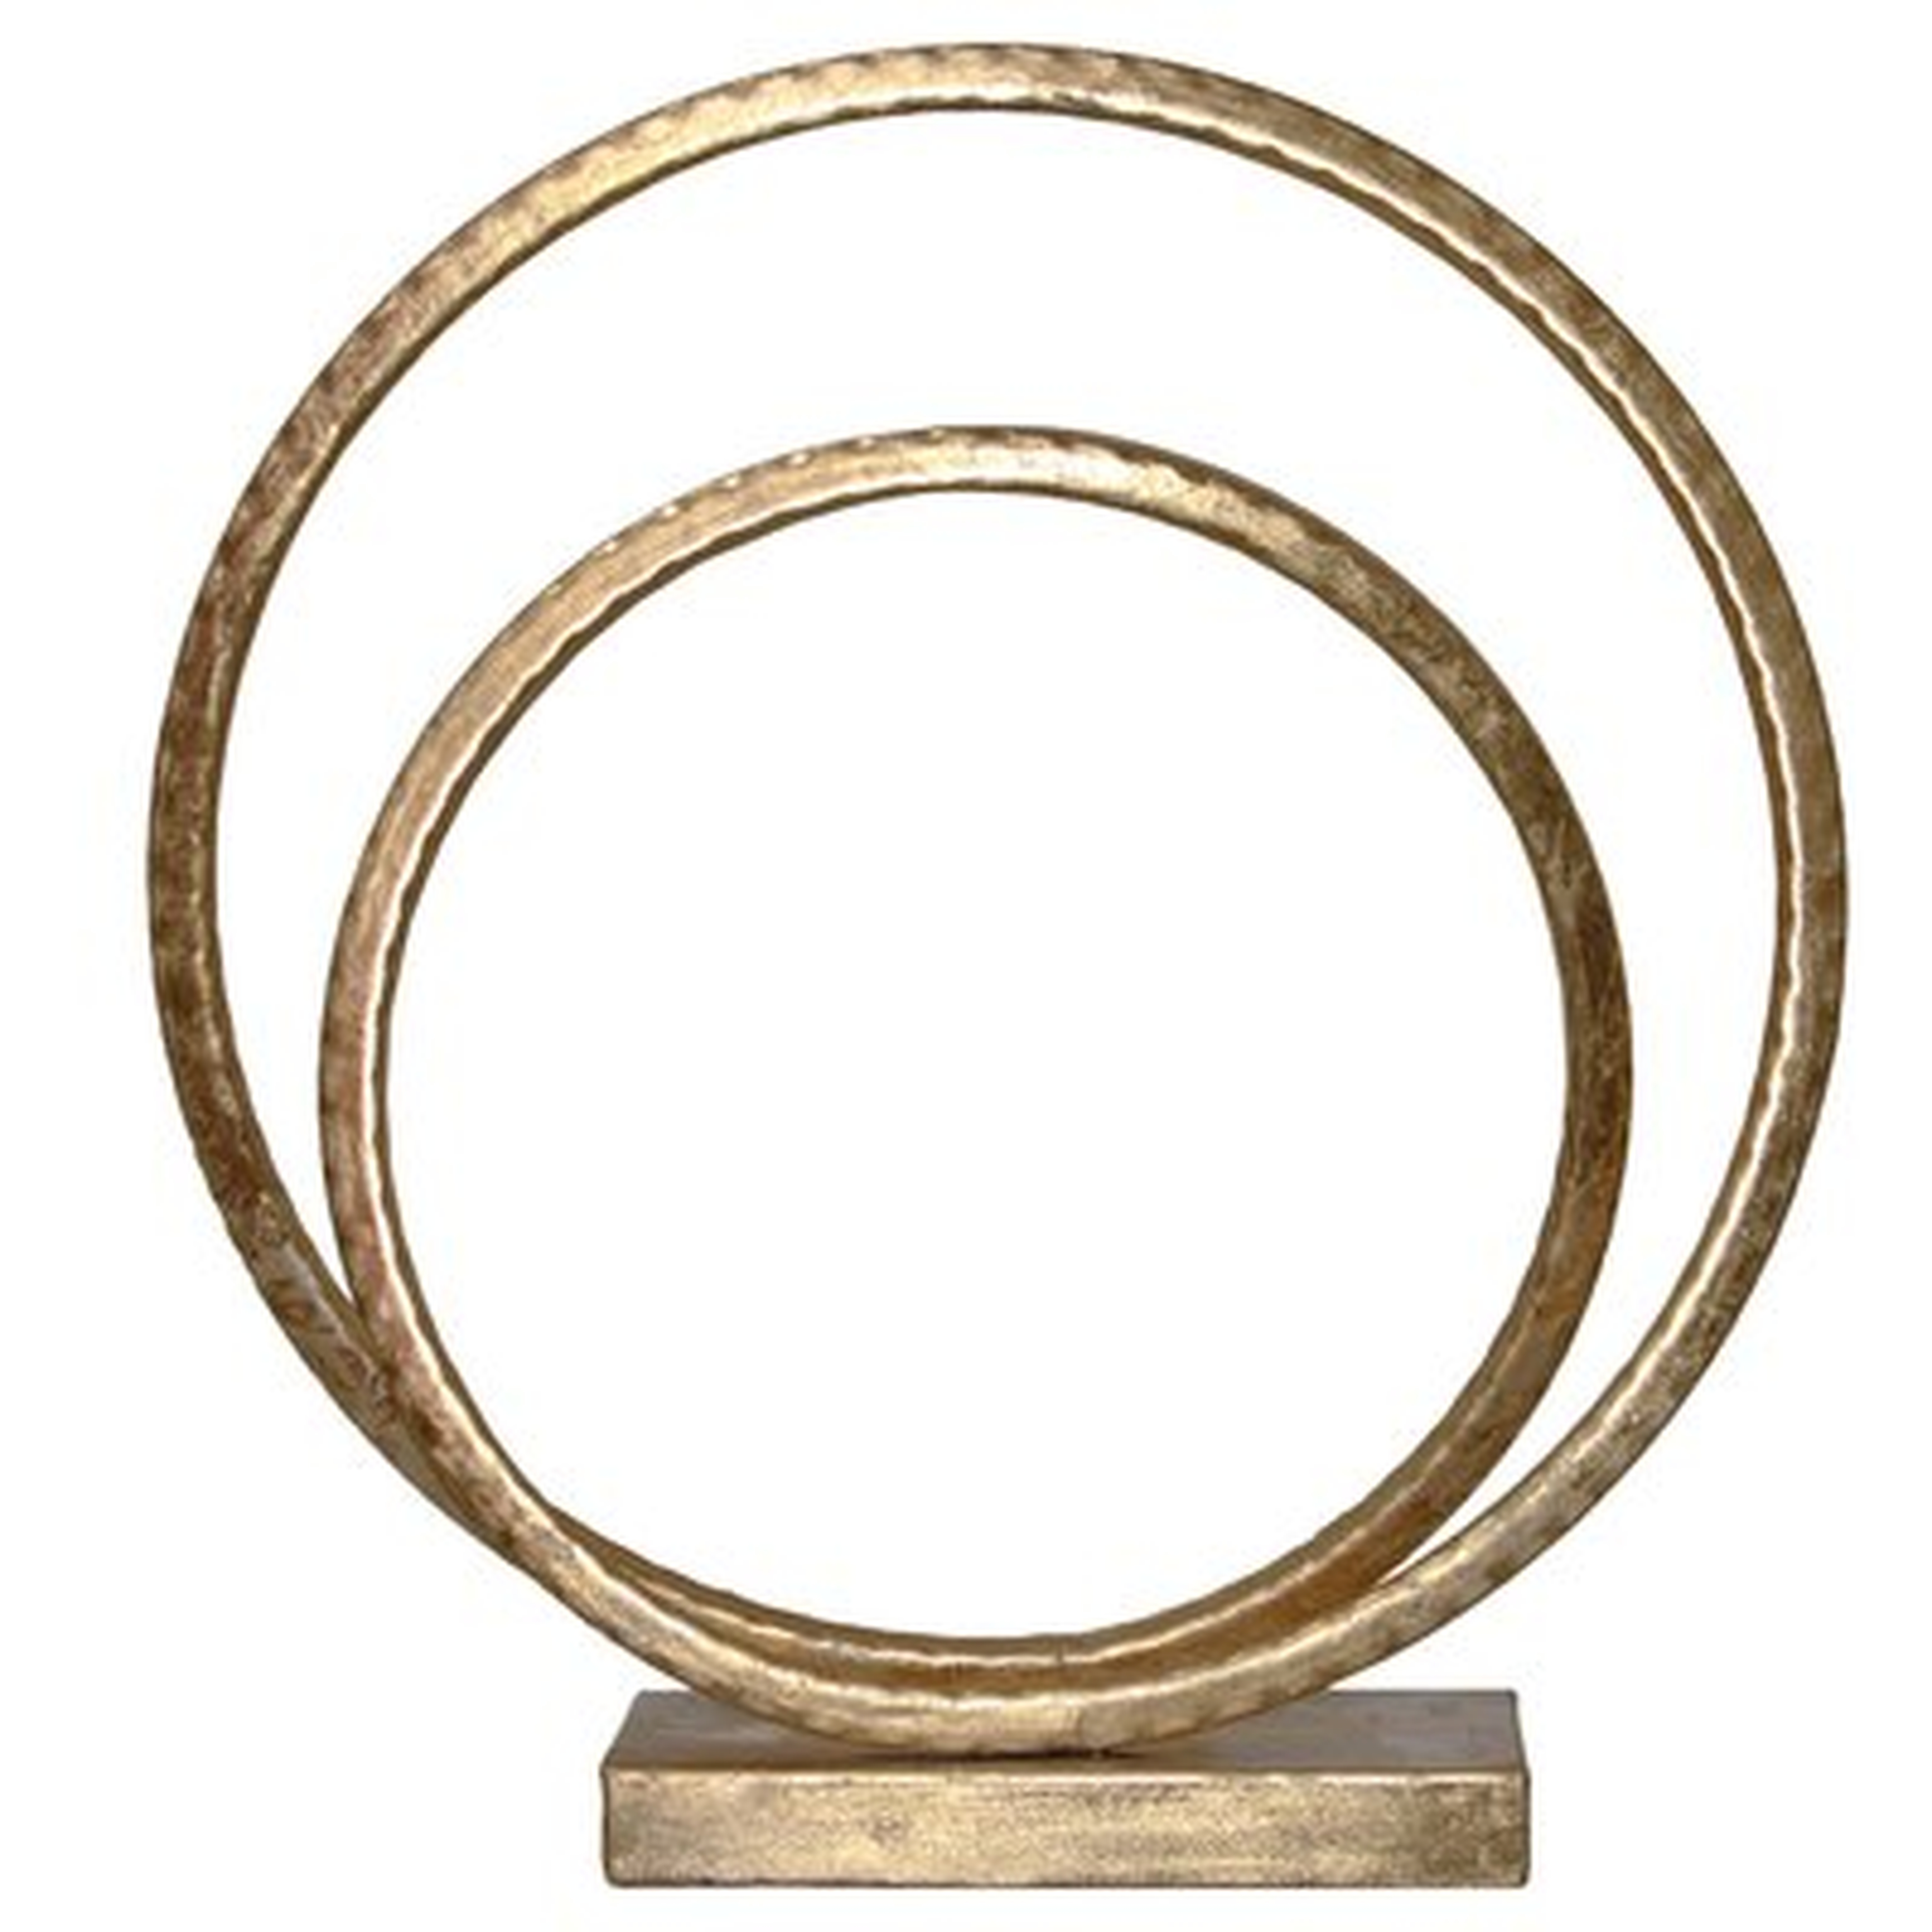 Greenpoint Metal Swirl Abstract on Square Base Sculpture - Wayfair